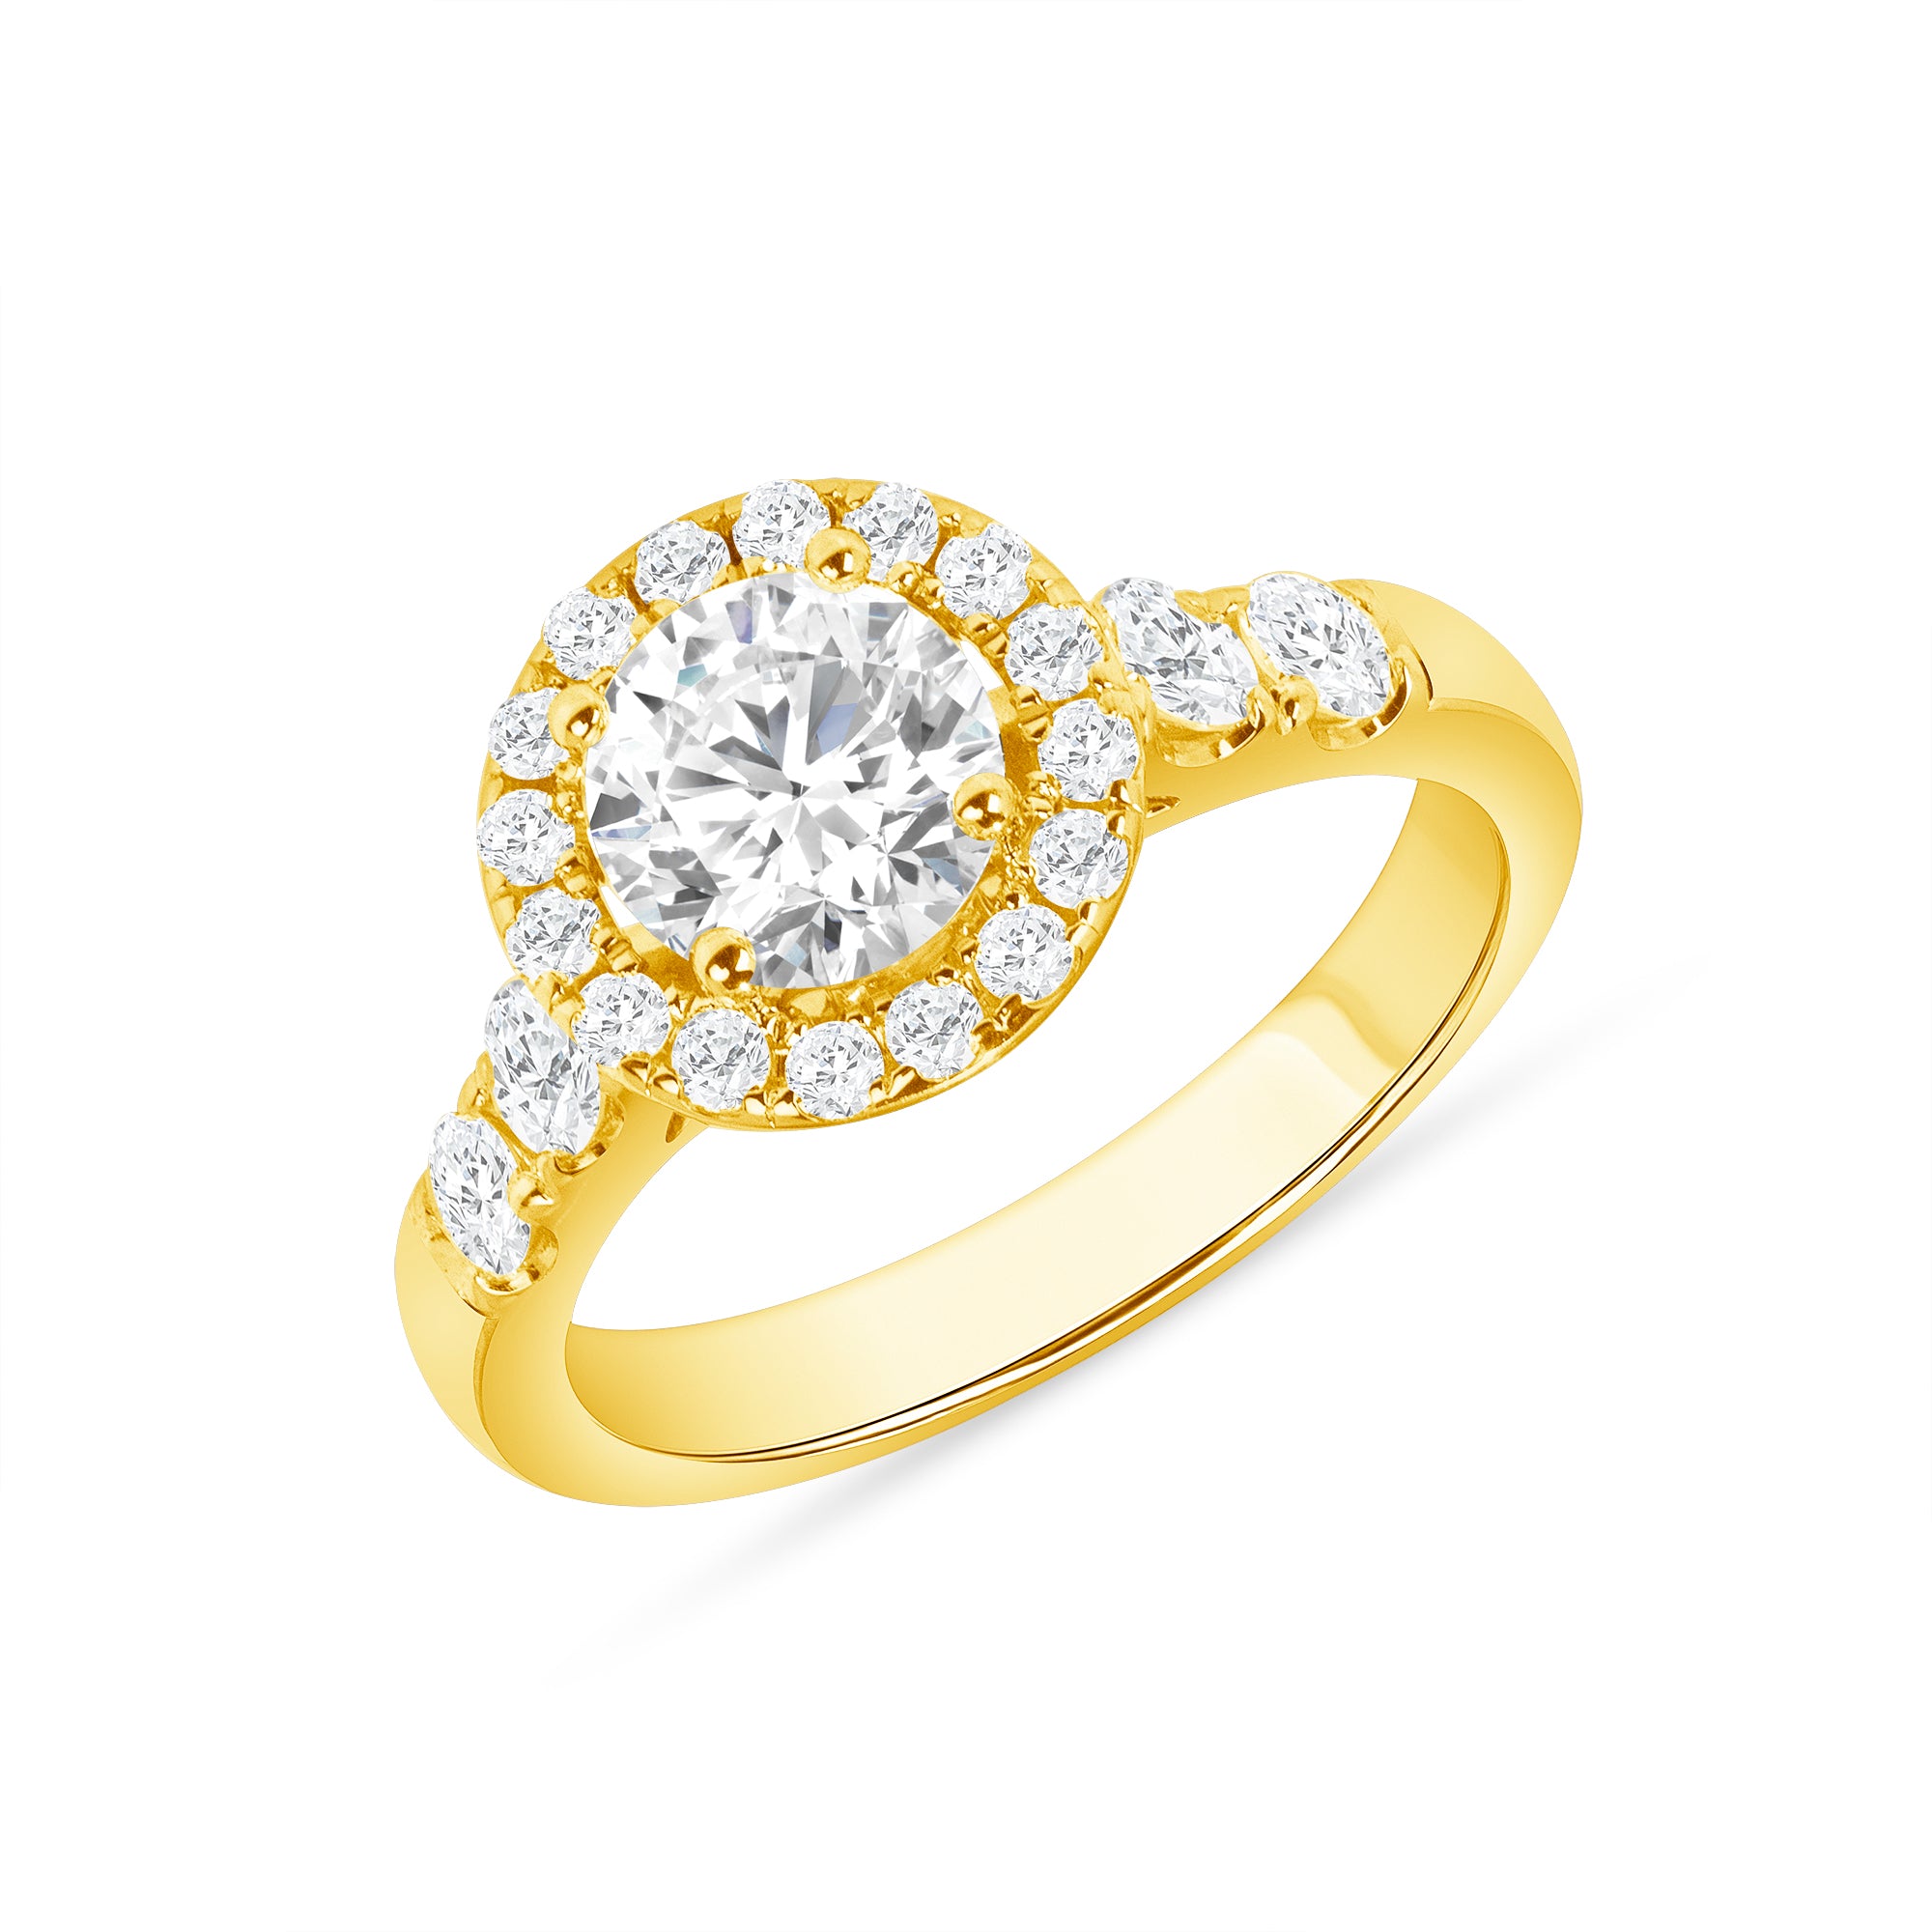 Round Cut Diamond Ring with Diamond Halo & Accents in Yellow Gold